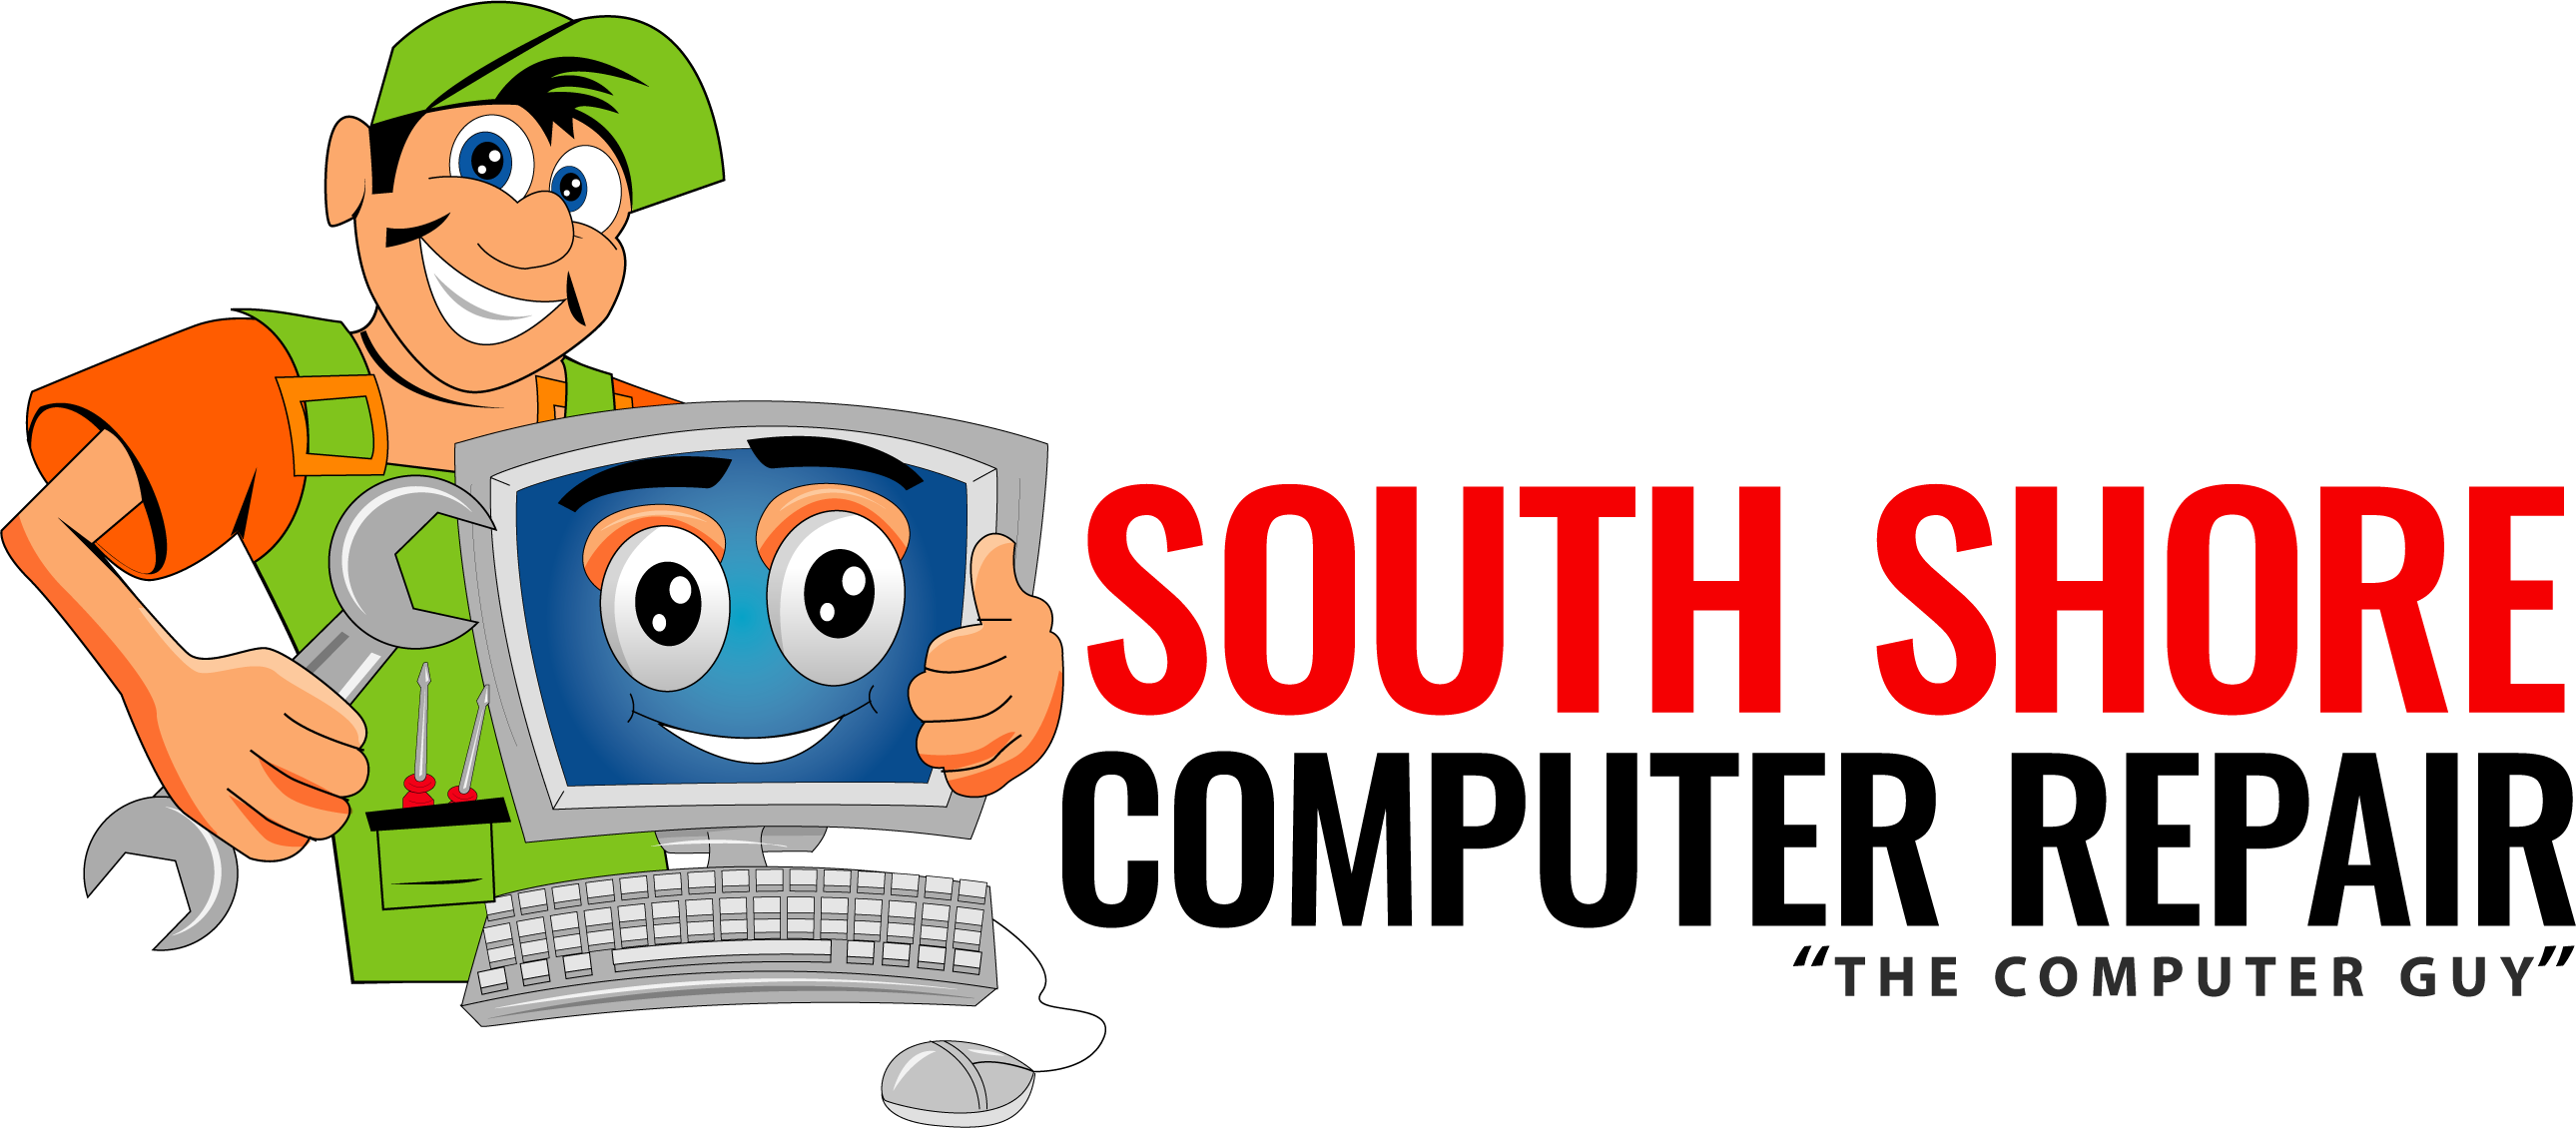 South shore computer the. See clipart watch repair